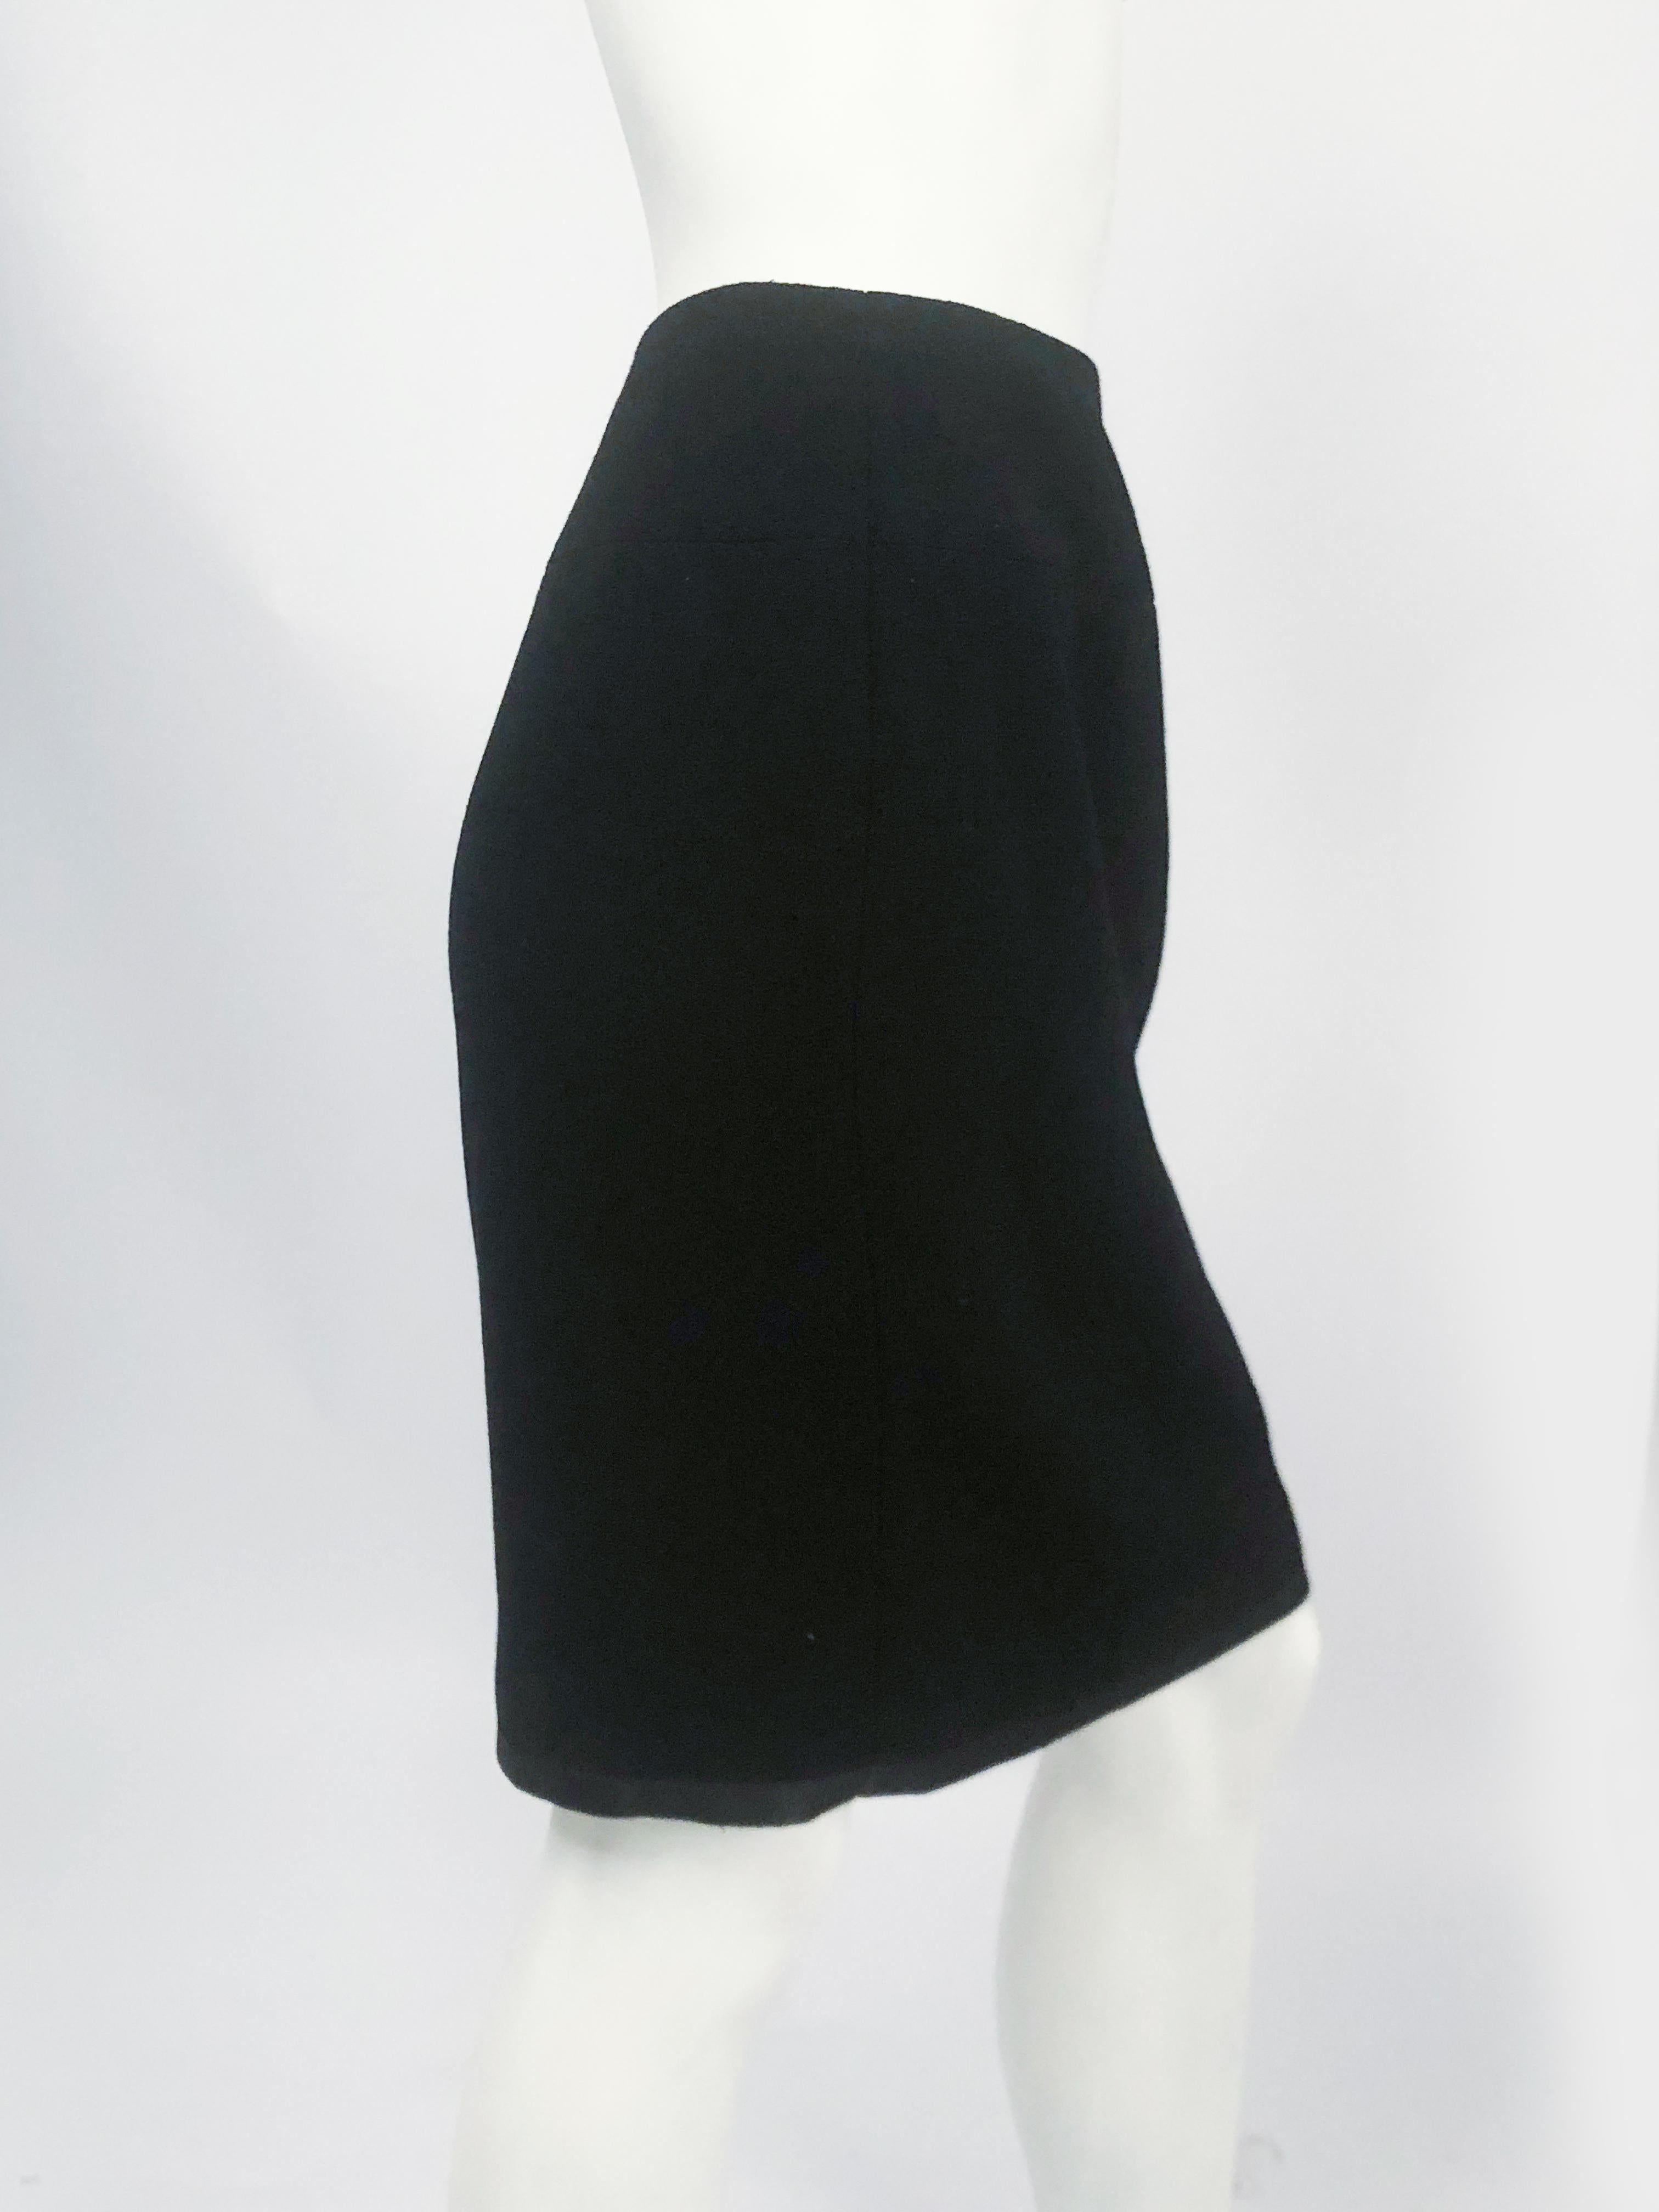 Women's 1990s Chanel Black Wool Skirt with Satin Hem and Silk Lining For Sale